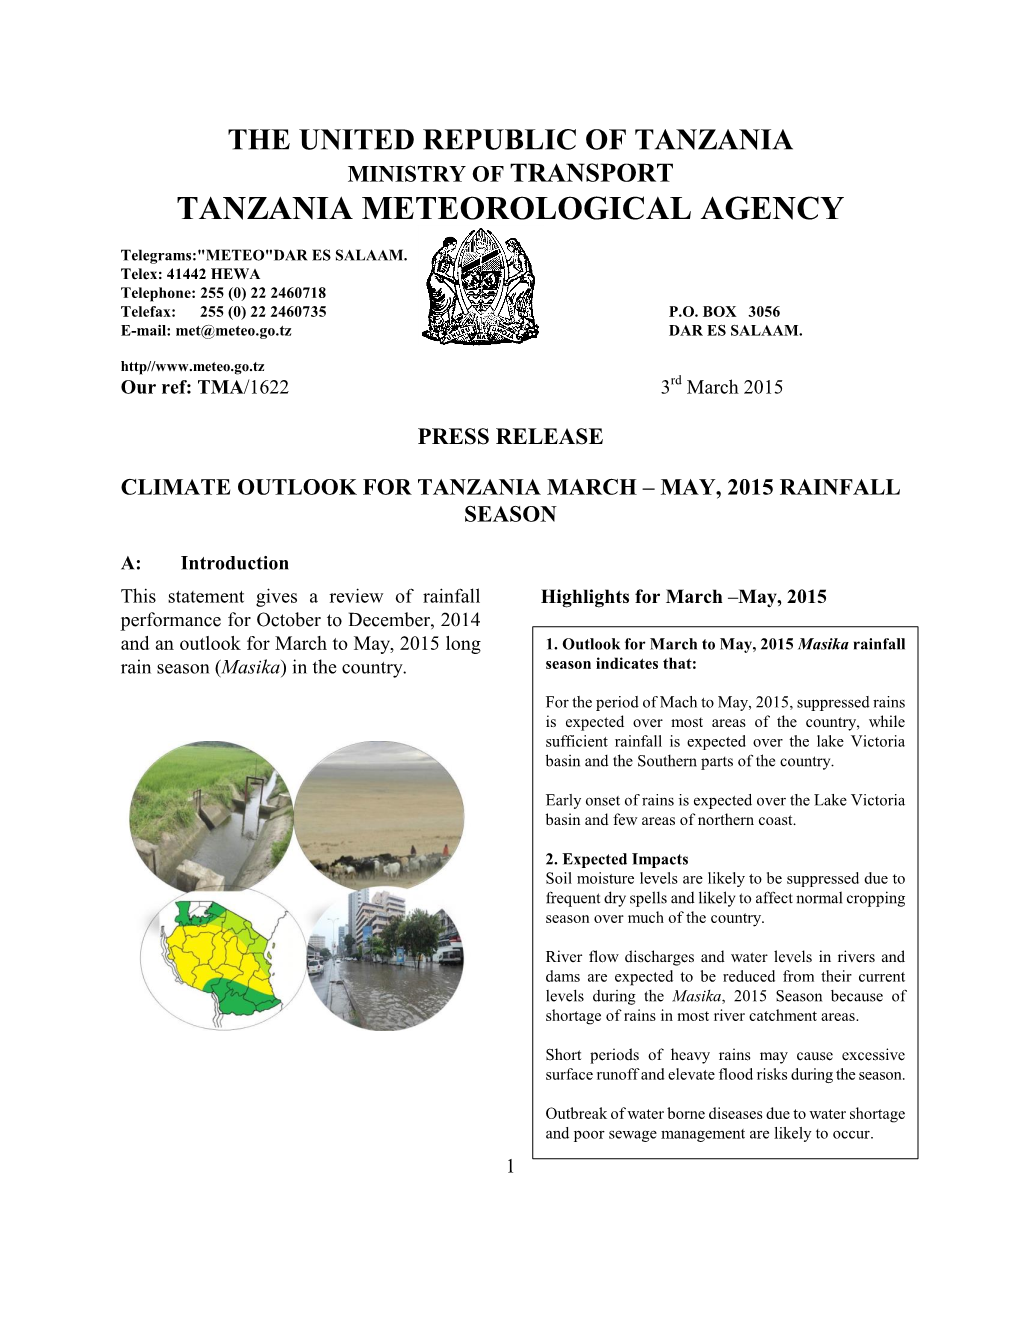 The United Republic of Tanzania Ministry of Transport Tanzania Meteorological Agency